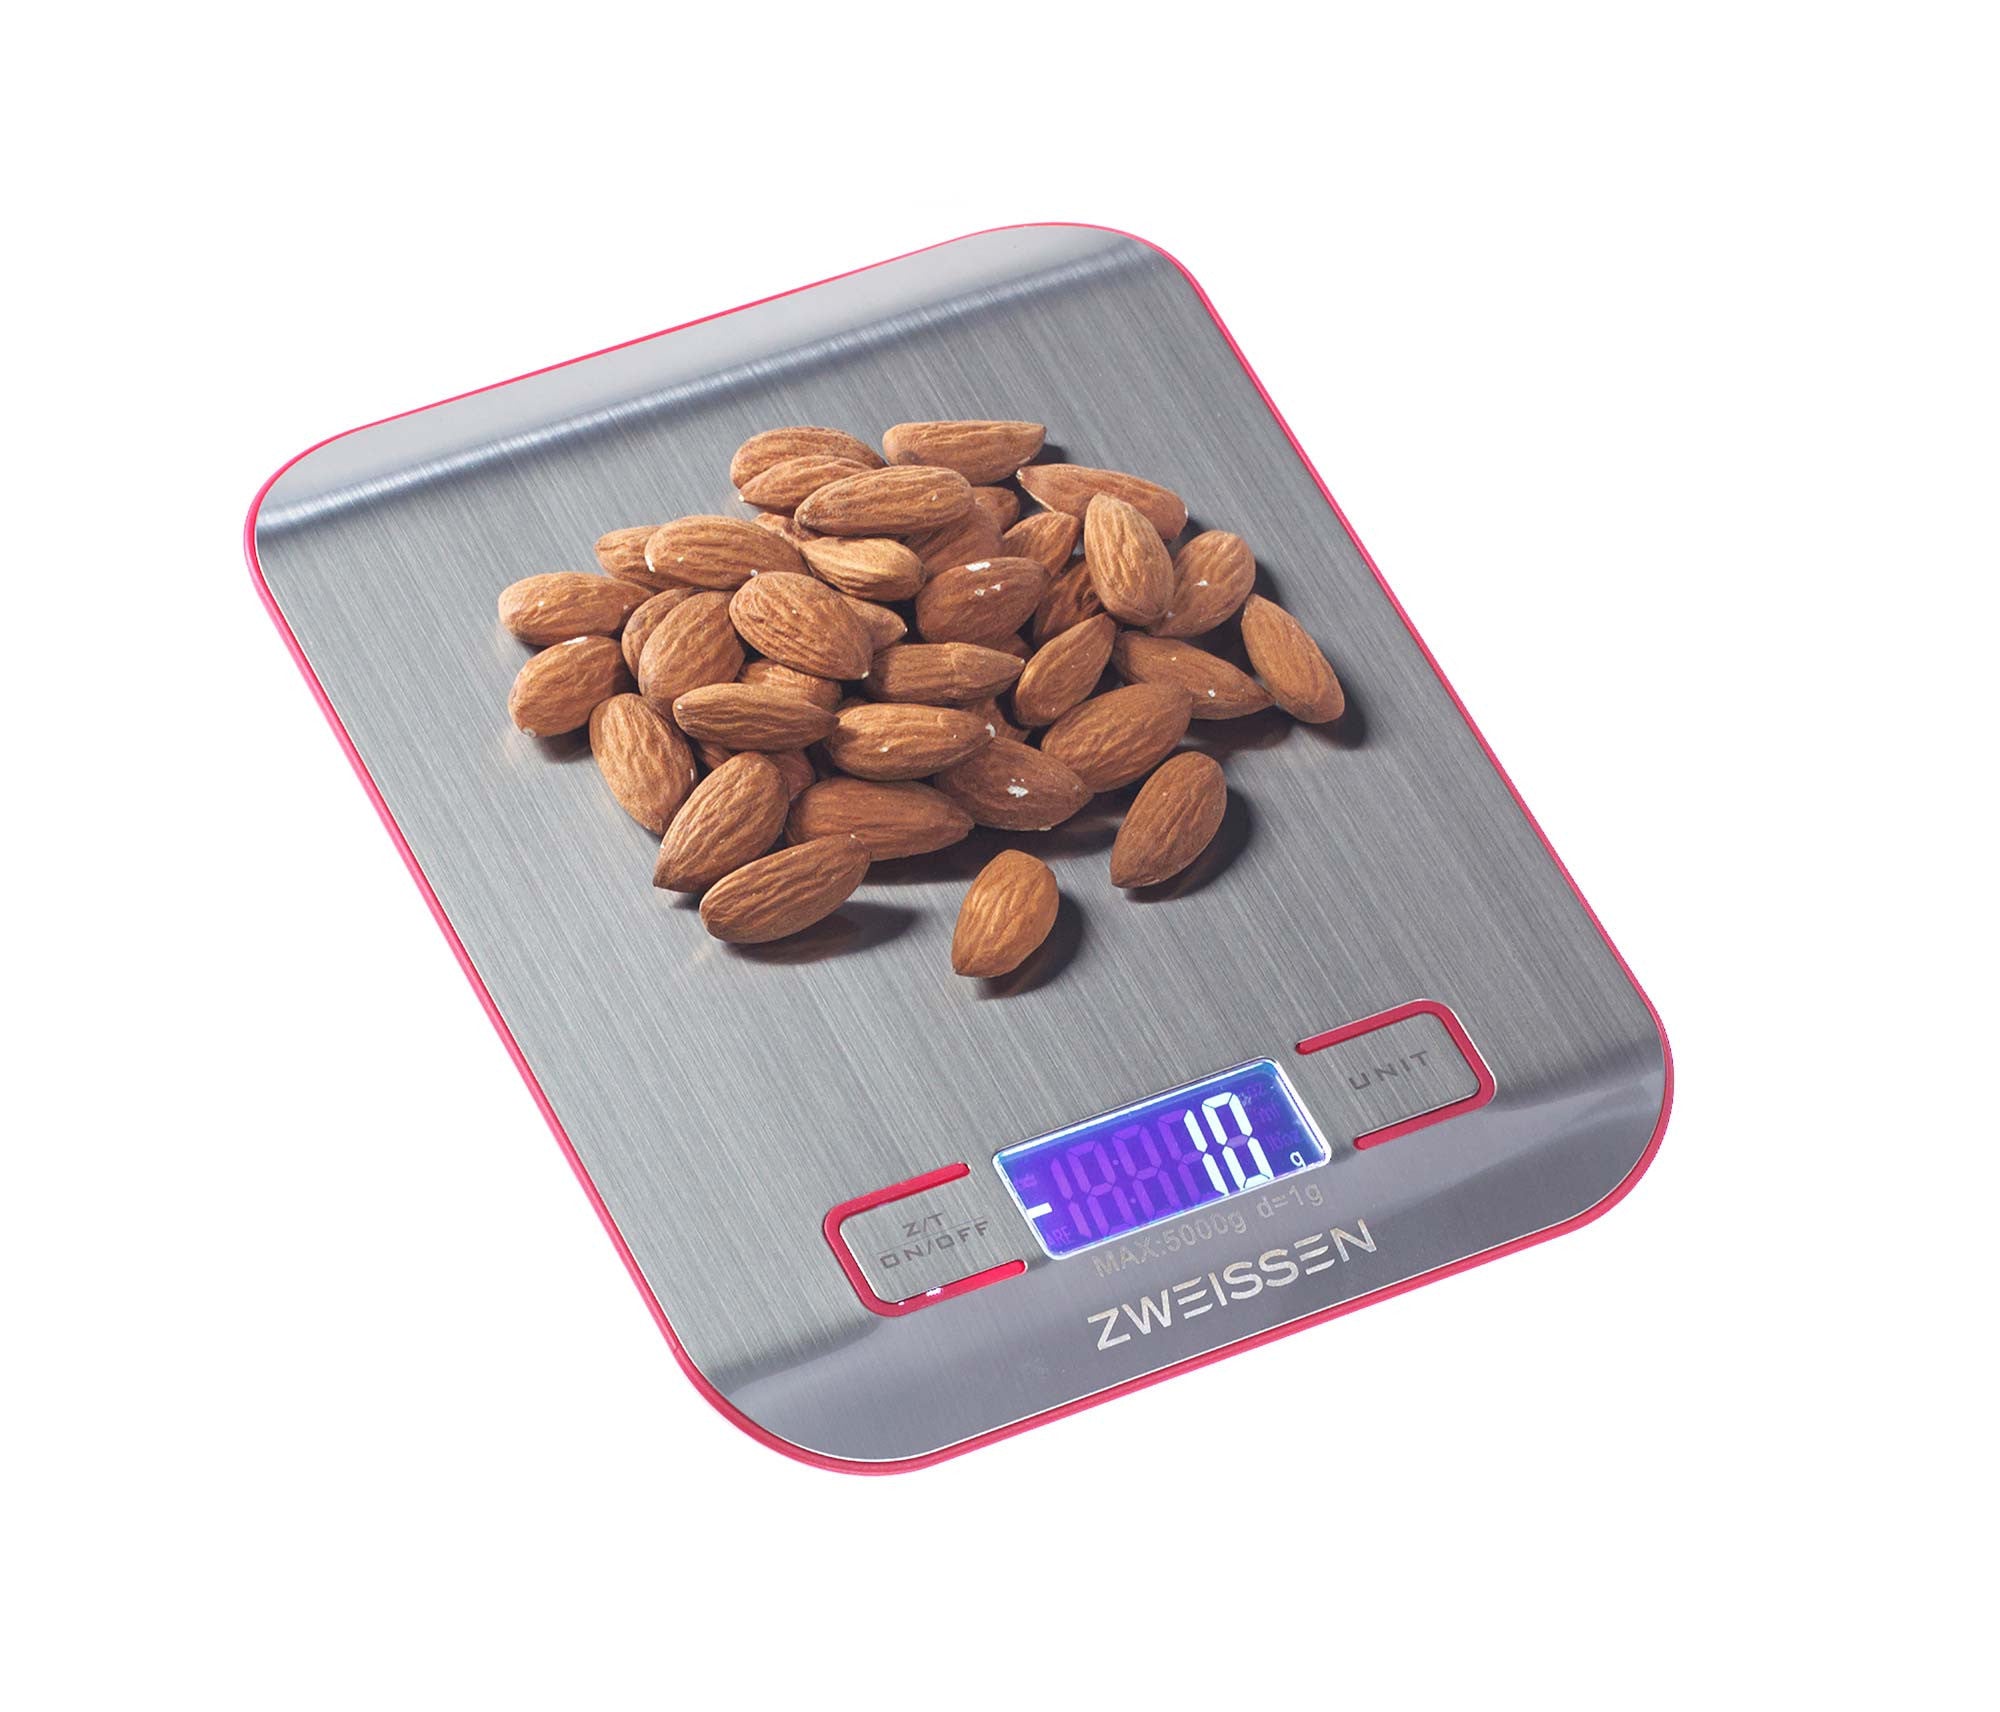 Aprilia Stainless Steel Digital Kitchen weigh Scale by Zweissen, 11 lb  capacity, Red